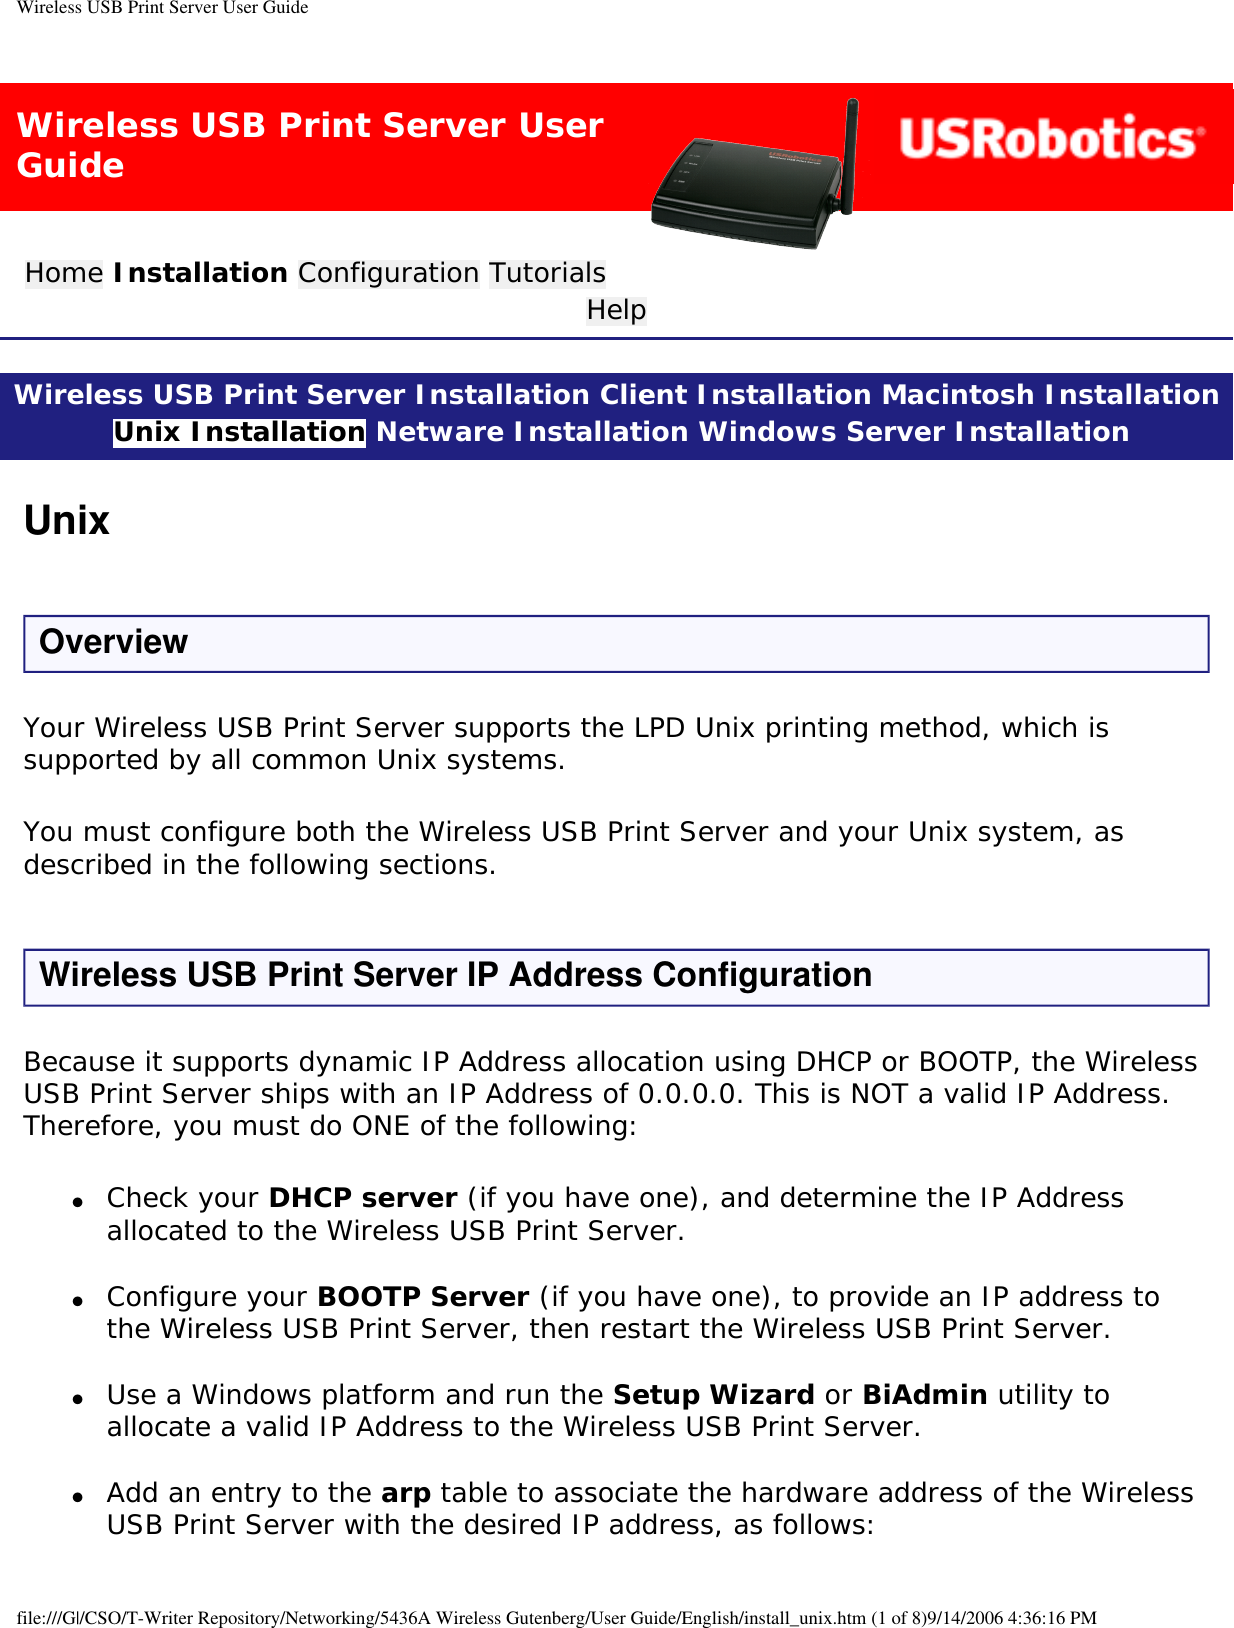 Wireless USB Print Server User GuideWireless USB Print Server User GuideHome Installation Configuration Tutorials Help Wireless USB Print Server Installation Client Installation Macintosh Installation Unix Installation Netware Installation Windows Server Installation UnixOverviewYour Wireless USB Print Server supports the LPD Unix printing method, which is supported by all common Unix systems.You must configure both the Wireless USB Print Server and your Unix system, as described in the following sections.Wireless USB Print Server IP Address ConfigurationBecause it supports dynamic IP Address allocation using DHCP or BOOTP, the Wireless USB Print Server ships with an IP Address of 0.0.0.0. This is NOT a valid IP Address. Therefore, you must do ONE of the following:●     Check your DHCP server (if you have one), and determine the IP Address allocated to the Wireless USB Print Server. ●     Configure your BOOTP Server (if you have one), to provide an IP address to the Wireless USB Print Server, then restart the Wireless USB Print Server. ●     Use a Windows platform and run the Setup Wizard or BiAdmin utility to allocate a valid IP Address to the Wireless USB Print Server. ●     Add an entry to the arp table to associate the hardware address of the Wireless USB Print Server with the desired IP address, as follows: file:///G|/CSO/T-Writer Repository/Networking/5436A Wireless Gutenberg/User Guide/English/install_unix.htm (1 of 8)9/14/2006 4:36:16 PM